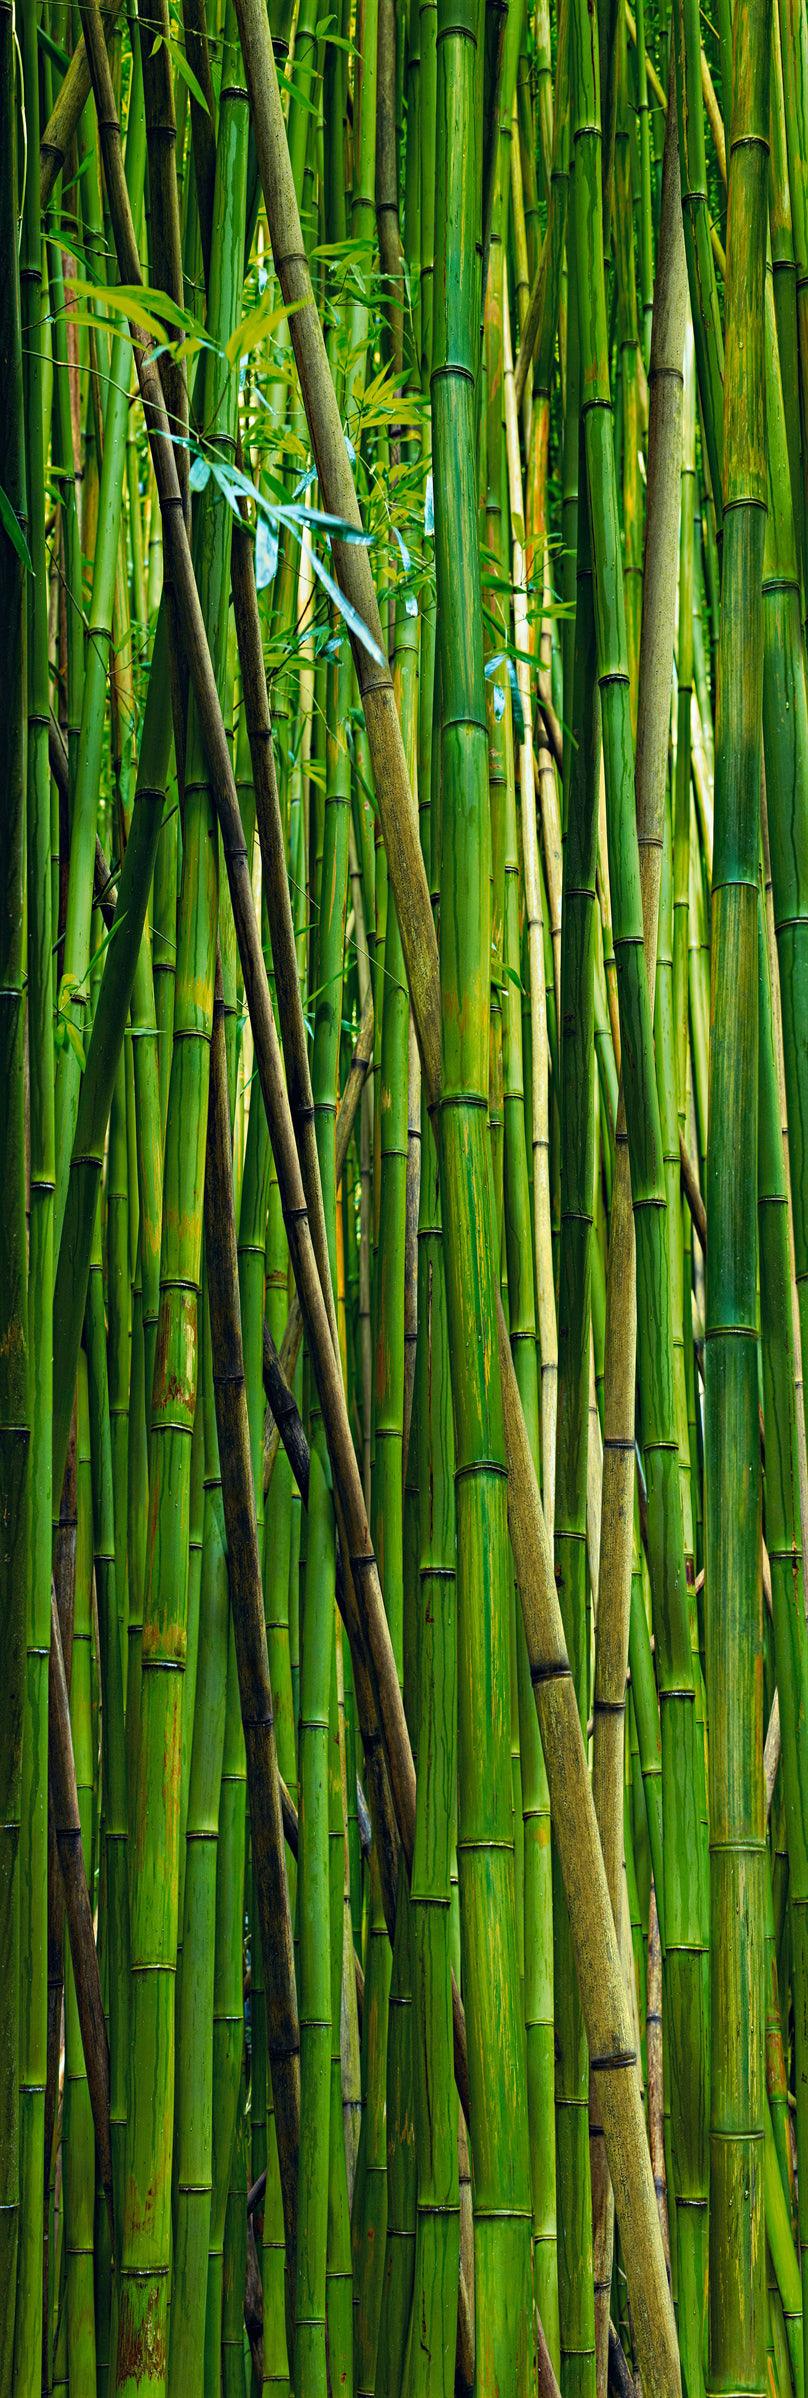 Wall of green and brown bamboo in the rainforest of Hana Hawaii